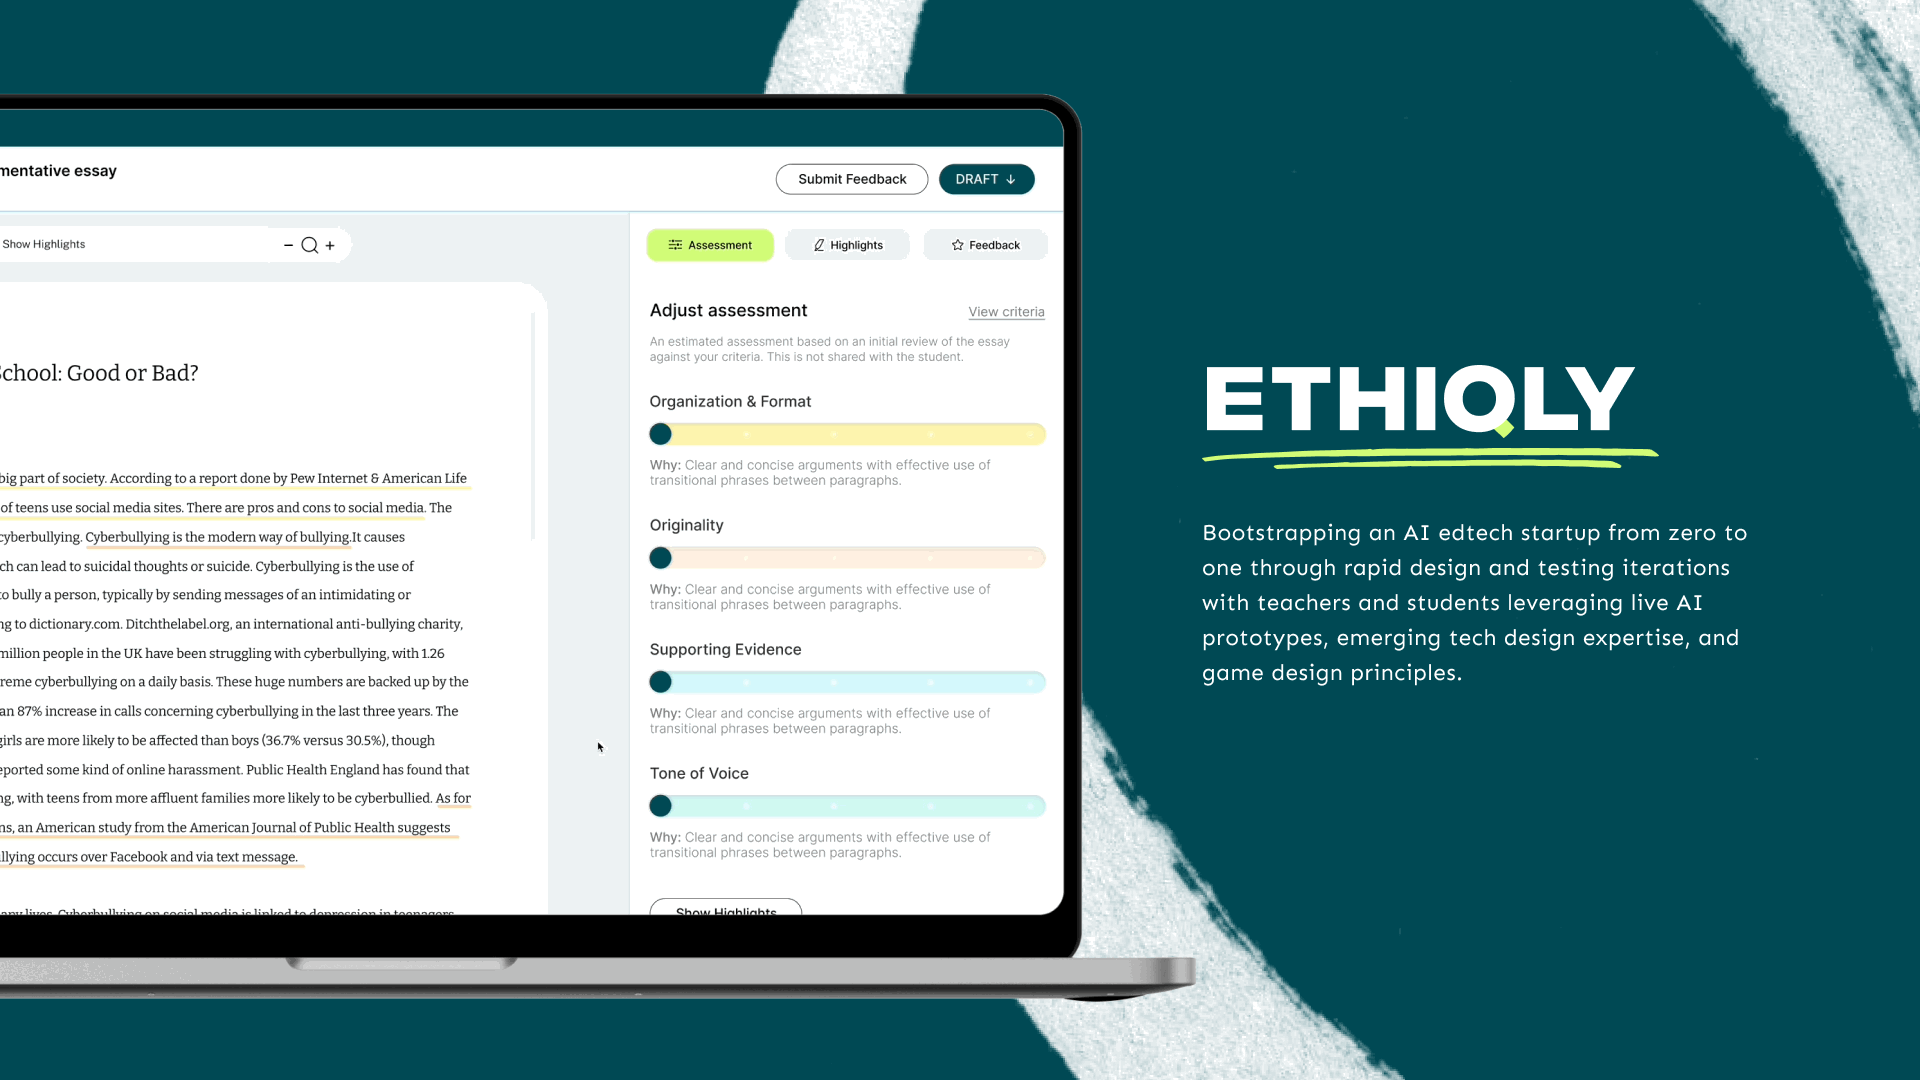 Introducing Ethiqly with a laptop previewing Ethiqly's assessment feature.